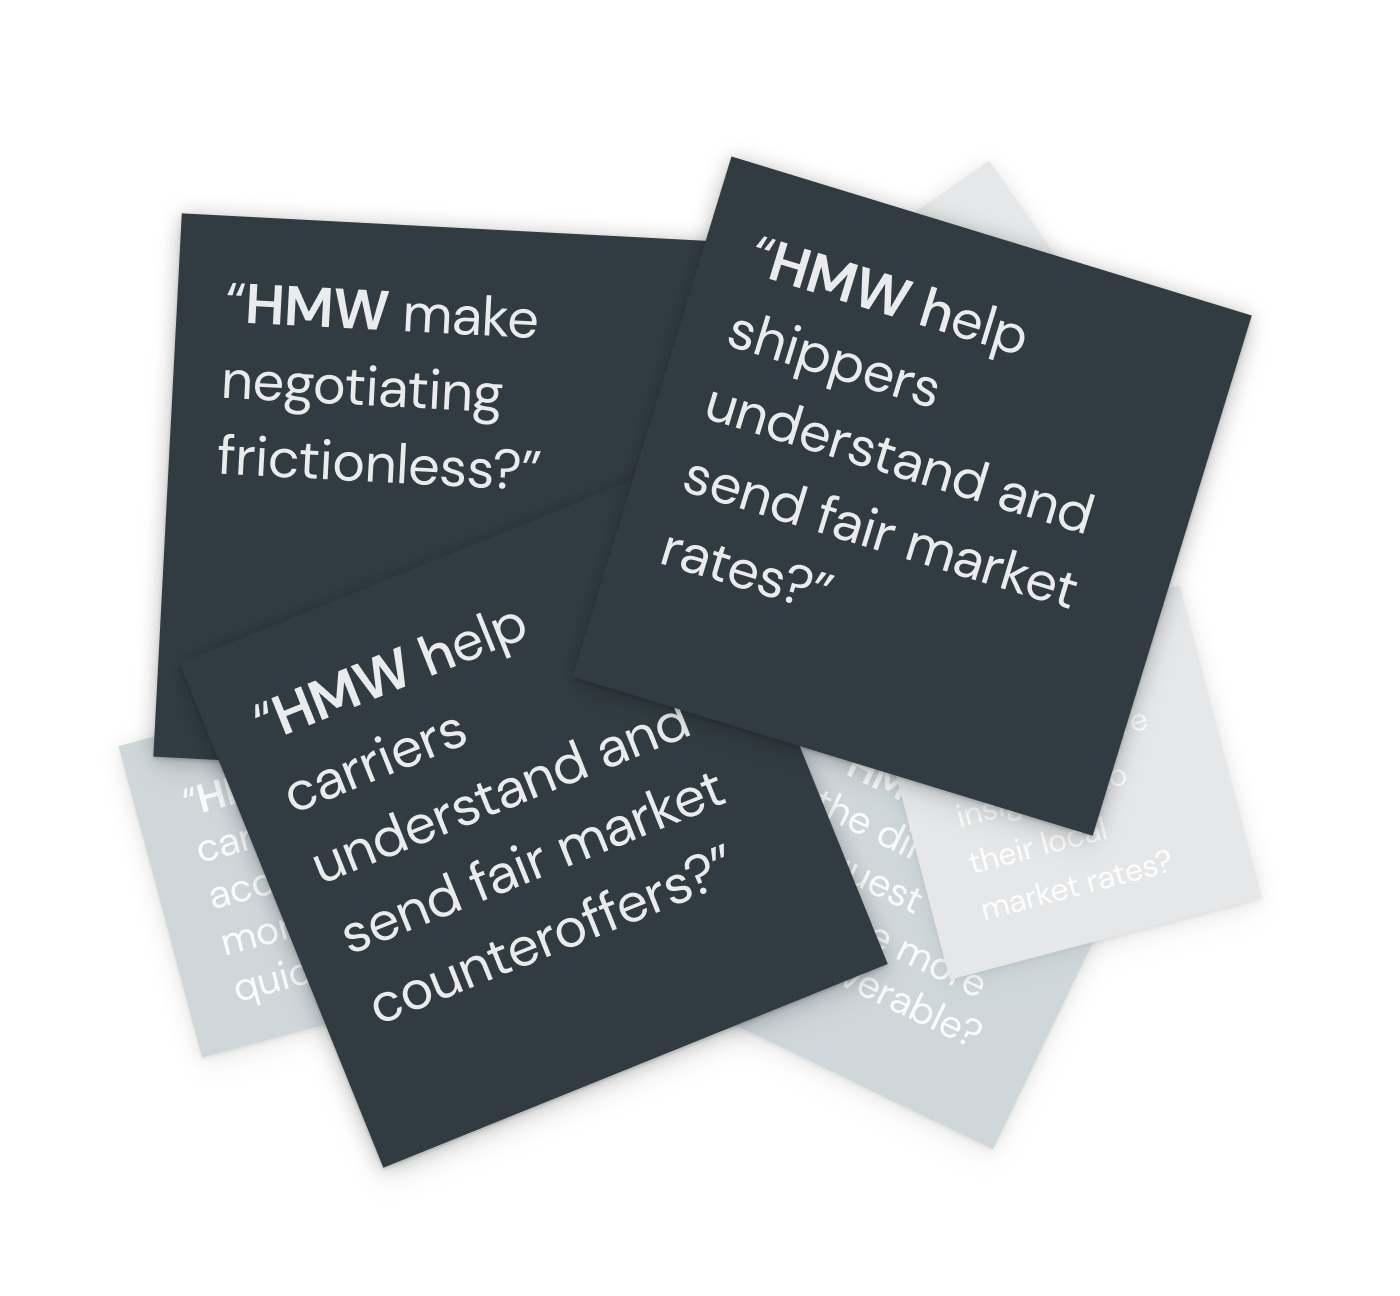 HMW make negotiating frictionless? HMW help shippers understand and send fair market rates? HMW help carriers understand and send fair market counteroffers?